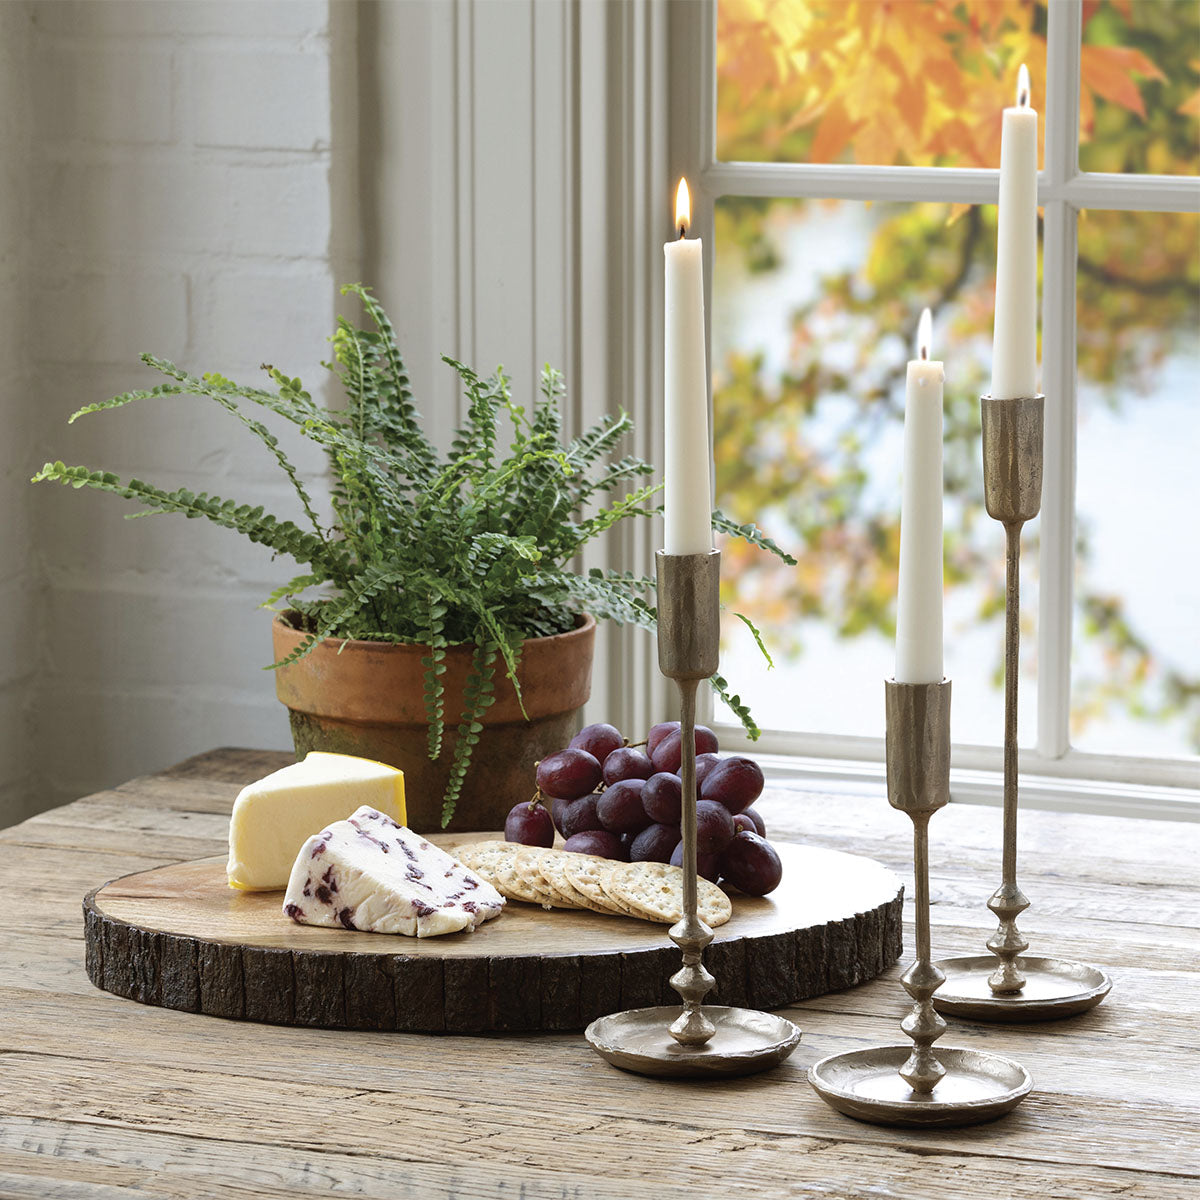 Wrought Iron Candle Holders - Iron Accents